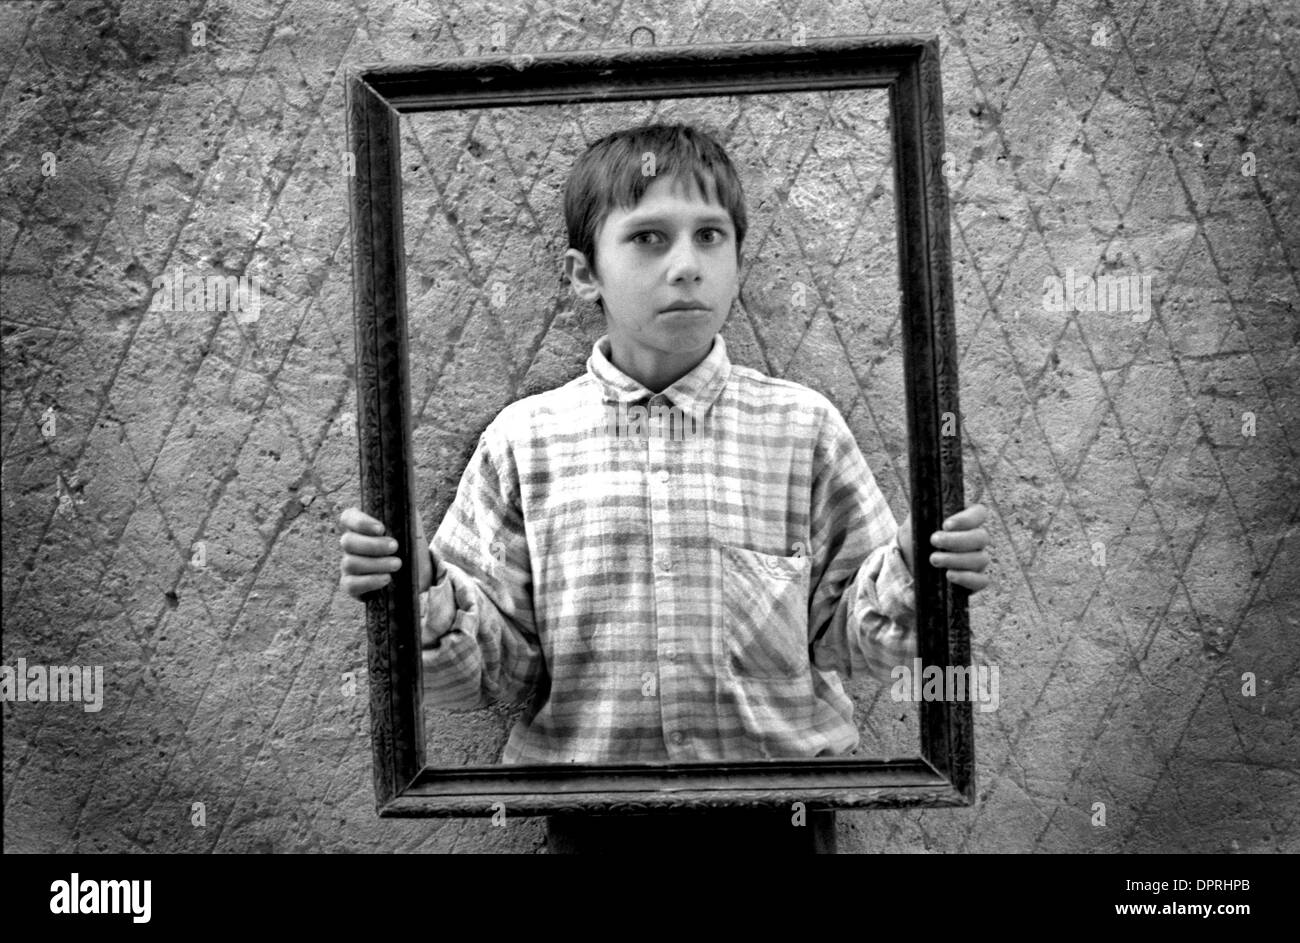 Jan 24, 2009 - Valea plopului, Romania - There is an estimated 100,000 children institutionalized in Romania's orphanages. The children were placed in the orphanages for numerous reasons, but most will blame Ceausescu's anti-abortion and child requirement laws. Ceausescu required that women have 5 children by the age of 45 before he would allow them birth control or abortions. Duri Stock Photo